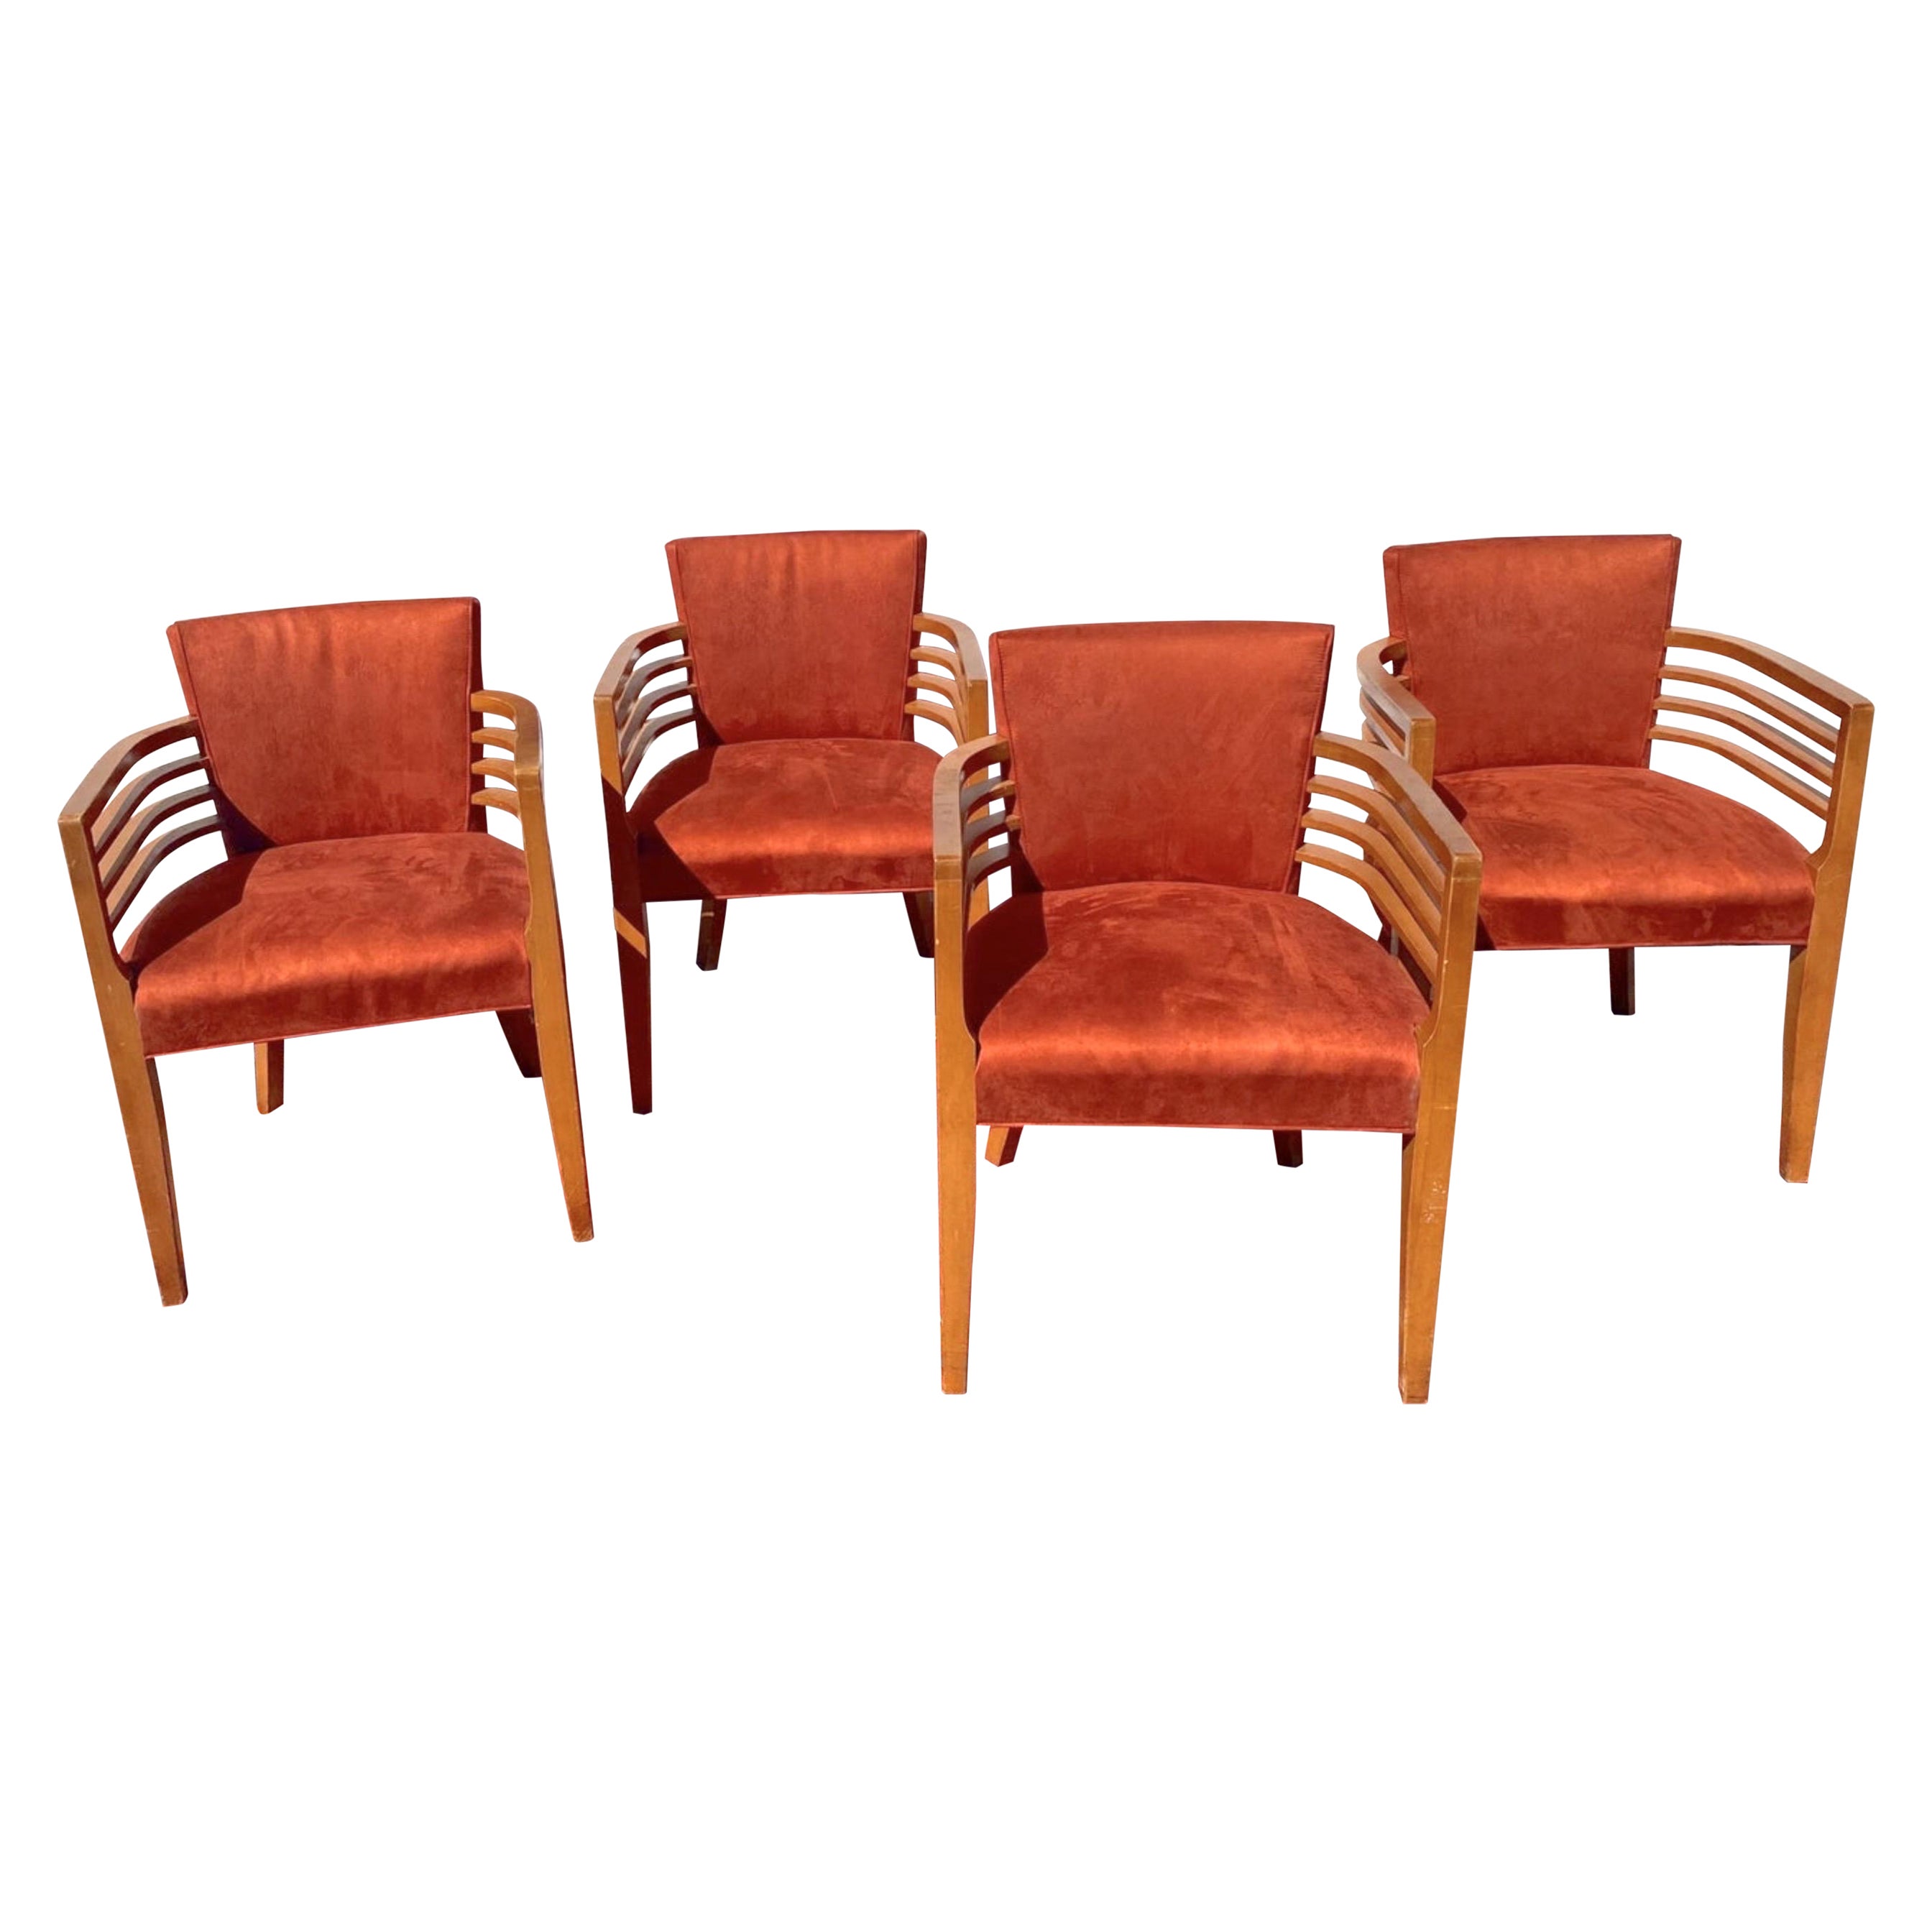 Set of 4 Knoll Art Deco Arm Chairs